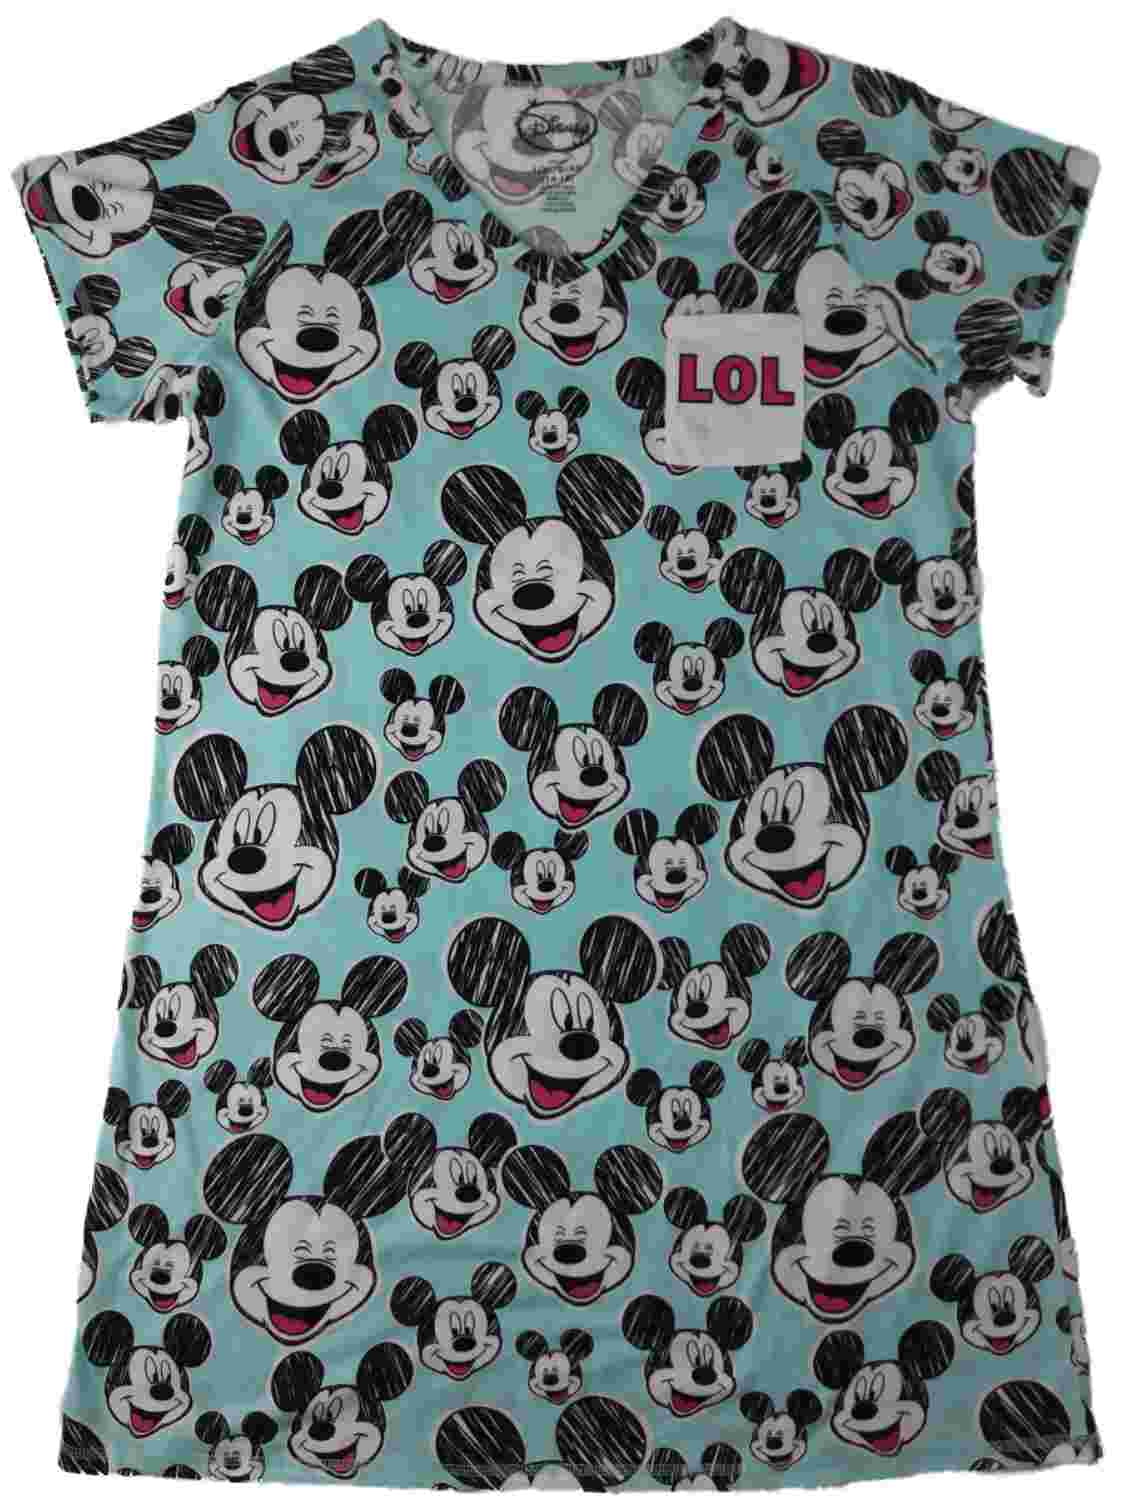 Disney Store Mickey Mouse Nightshirt Nightgown 3X-New w/Tags-Free Ship